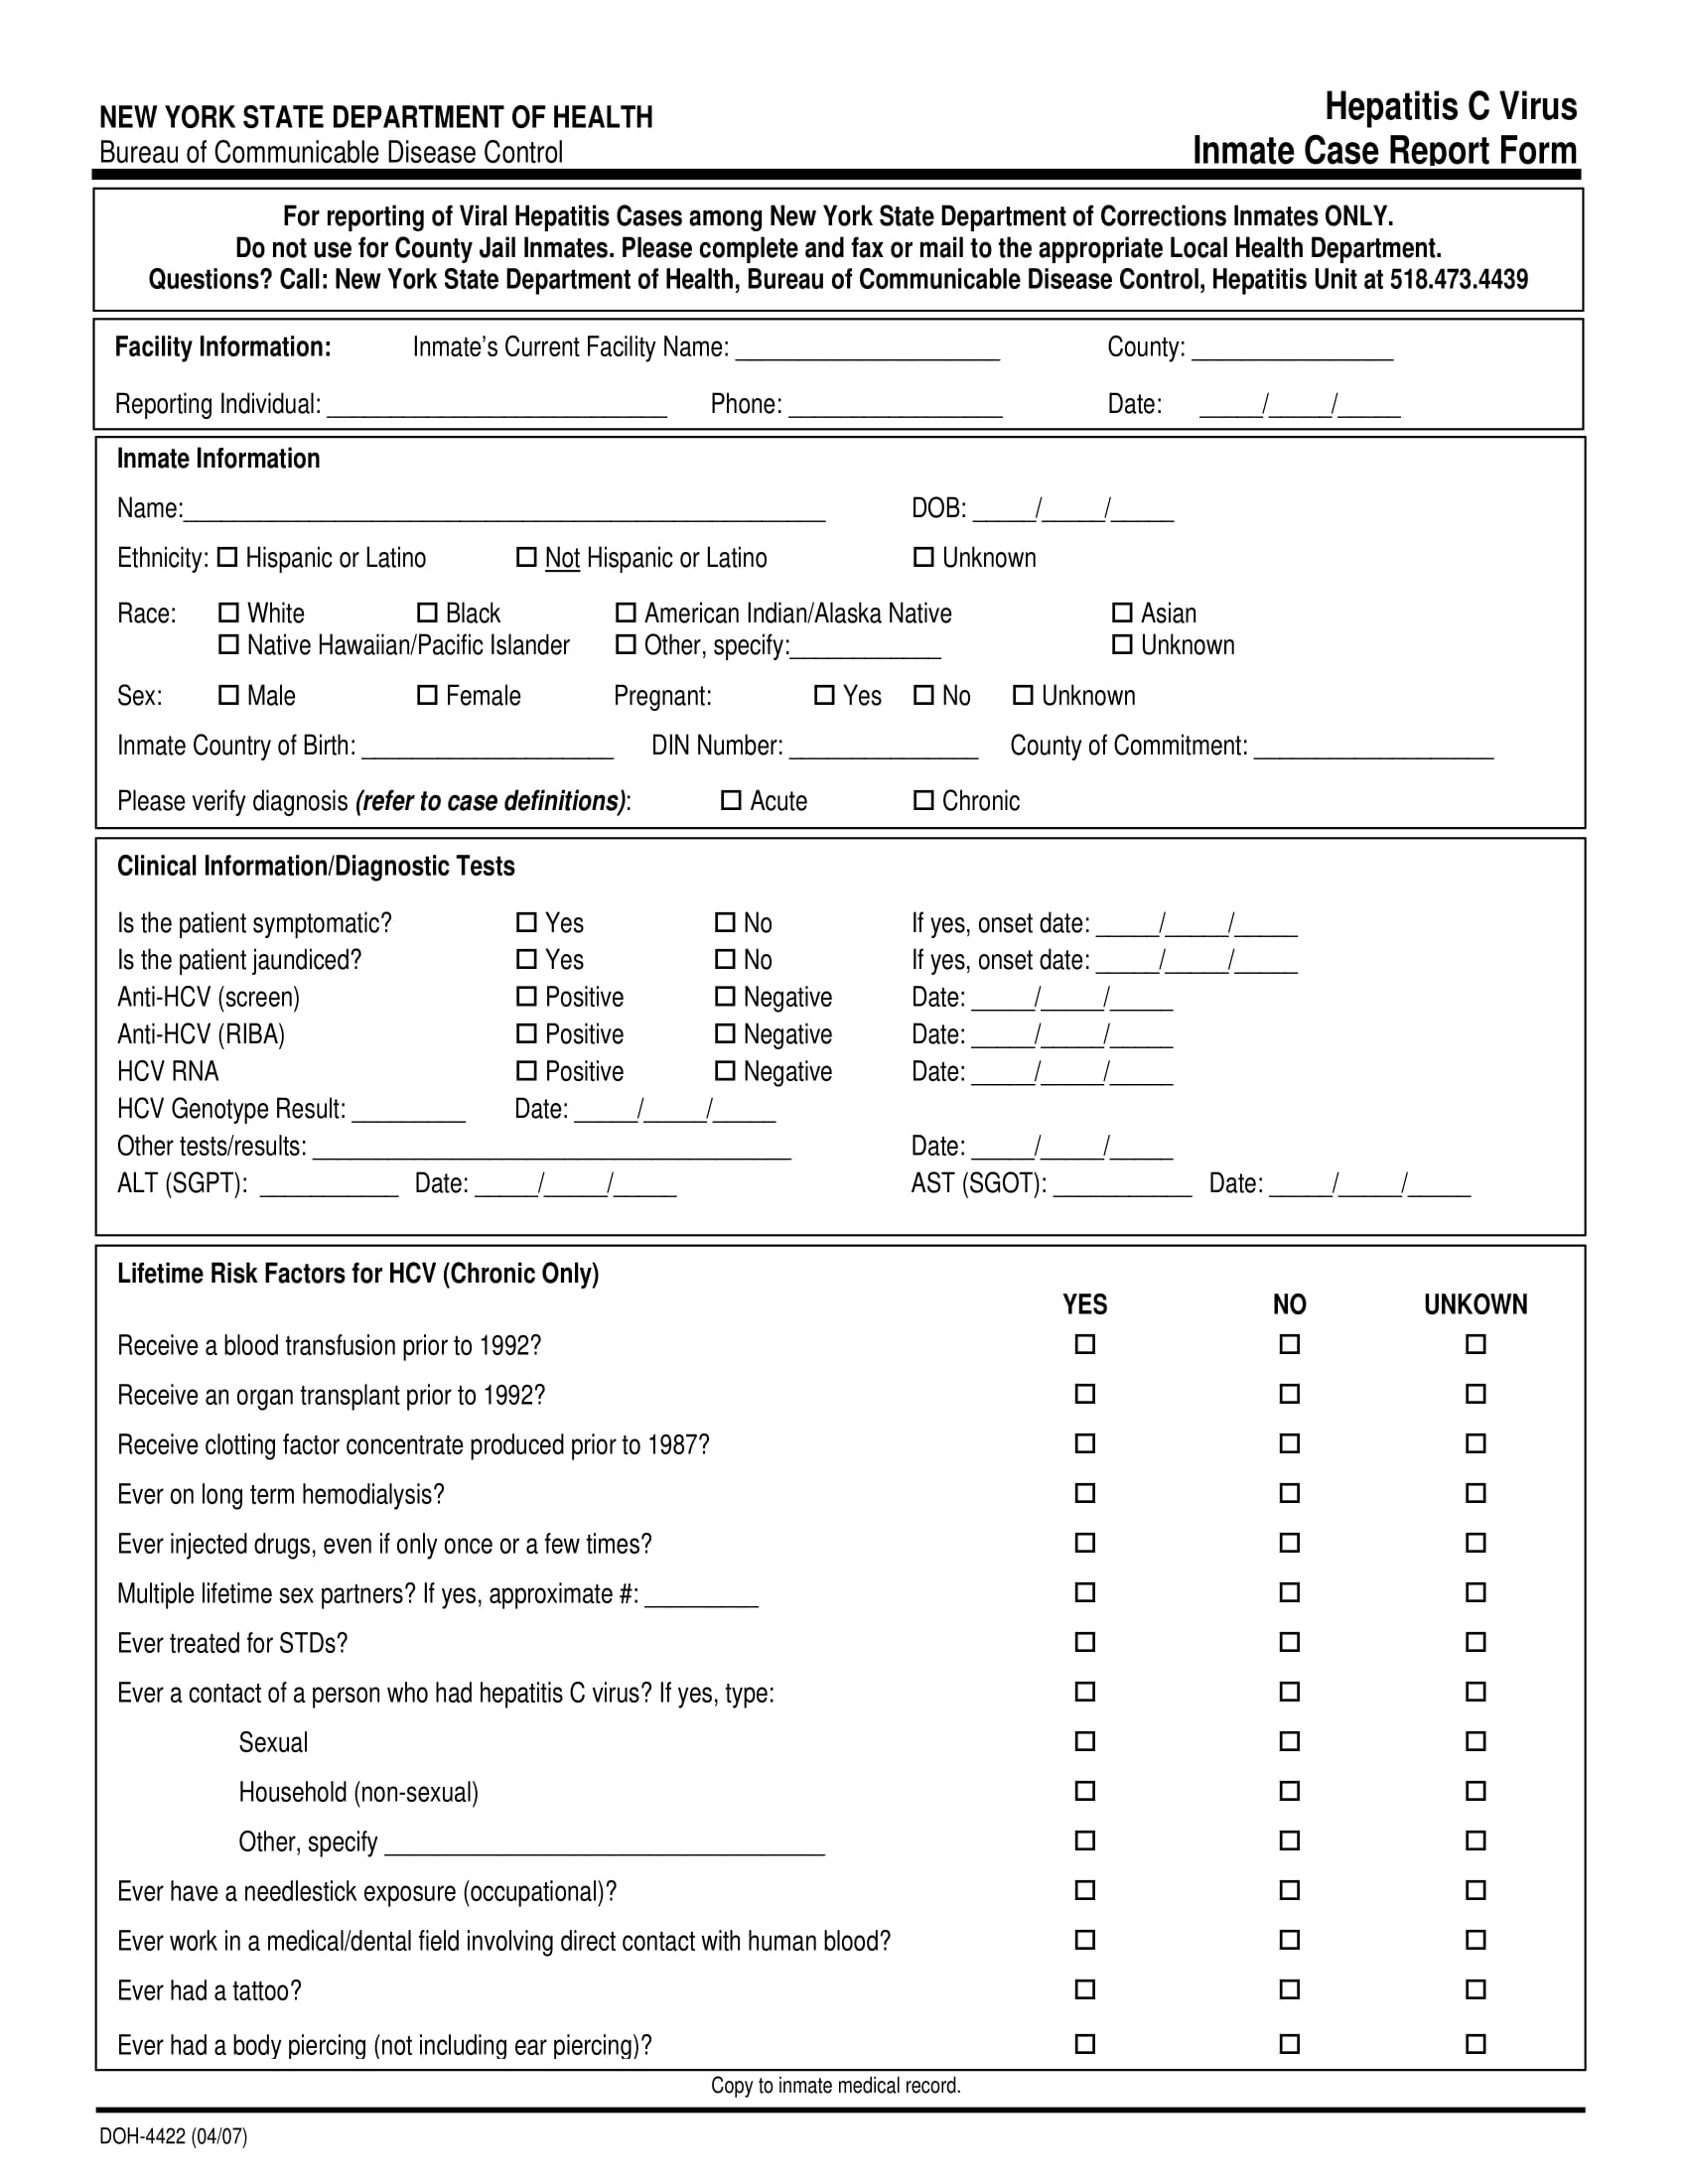 inmate casse report form 1